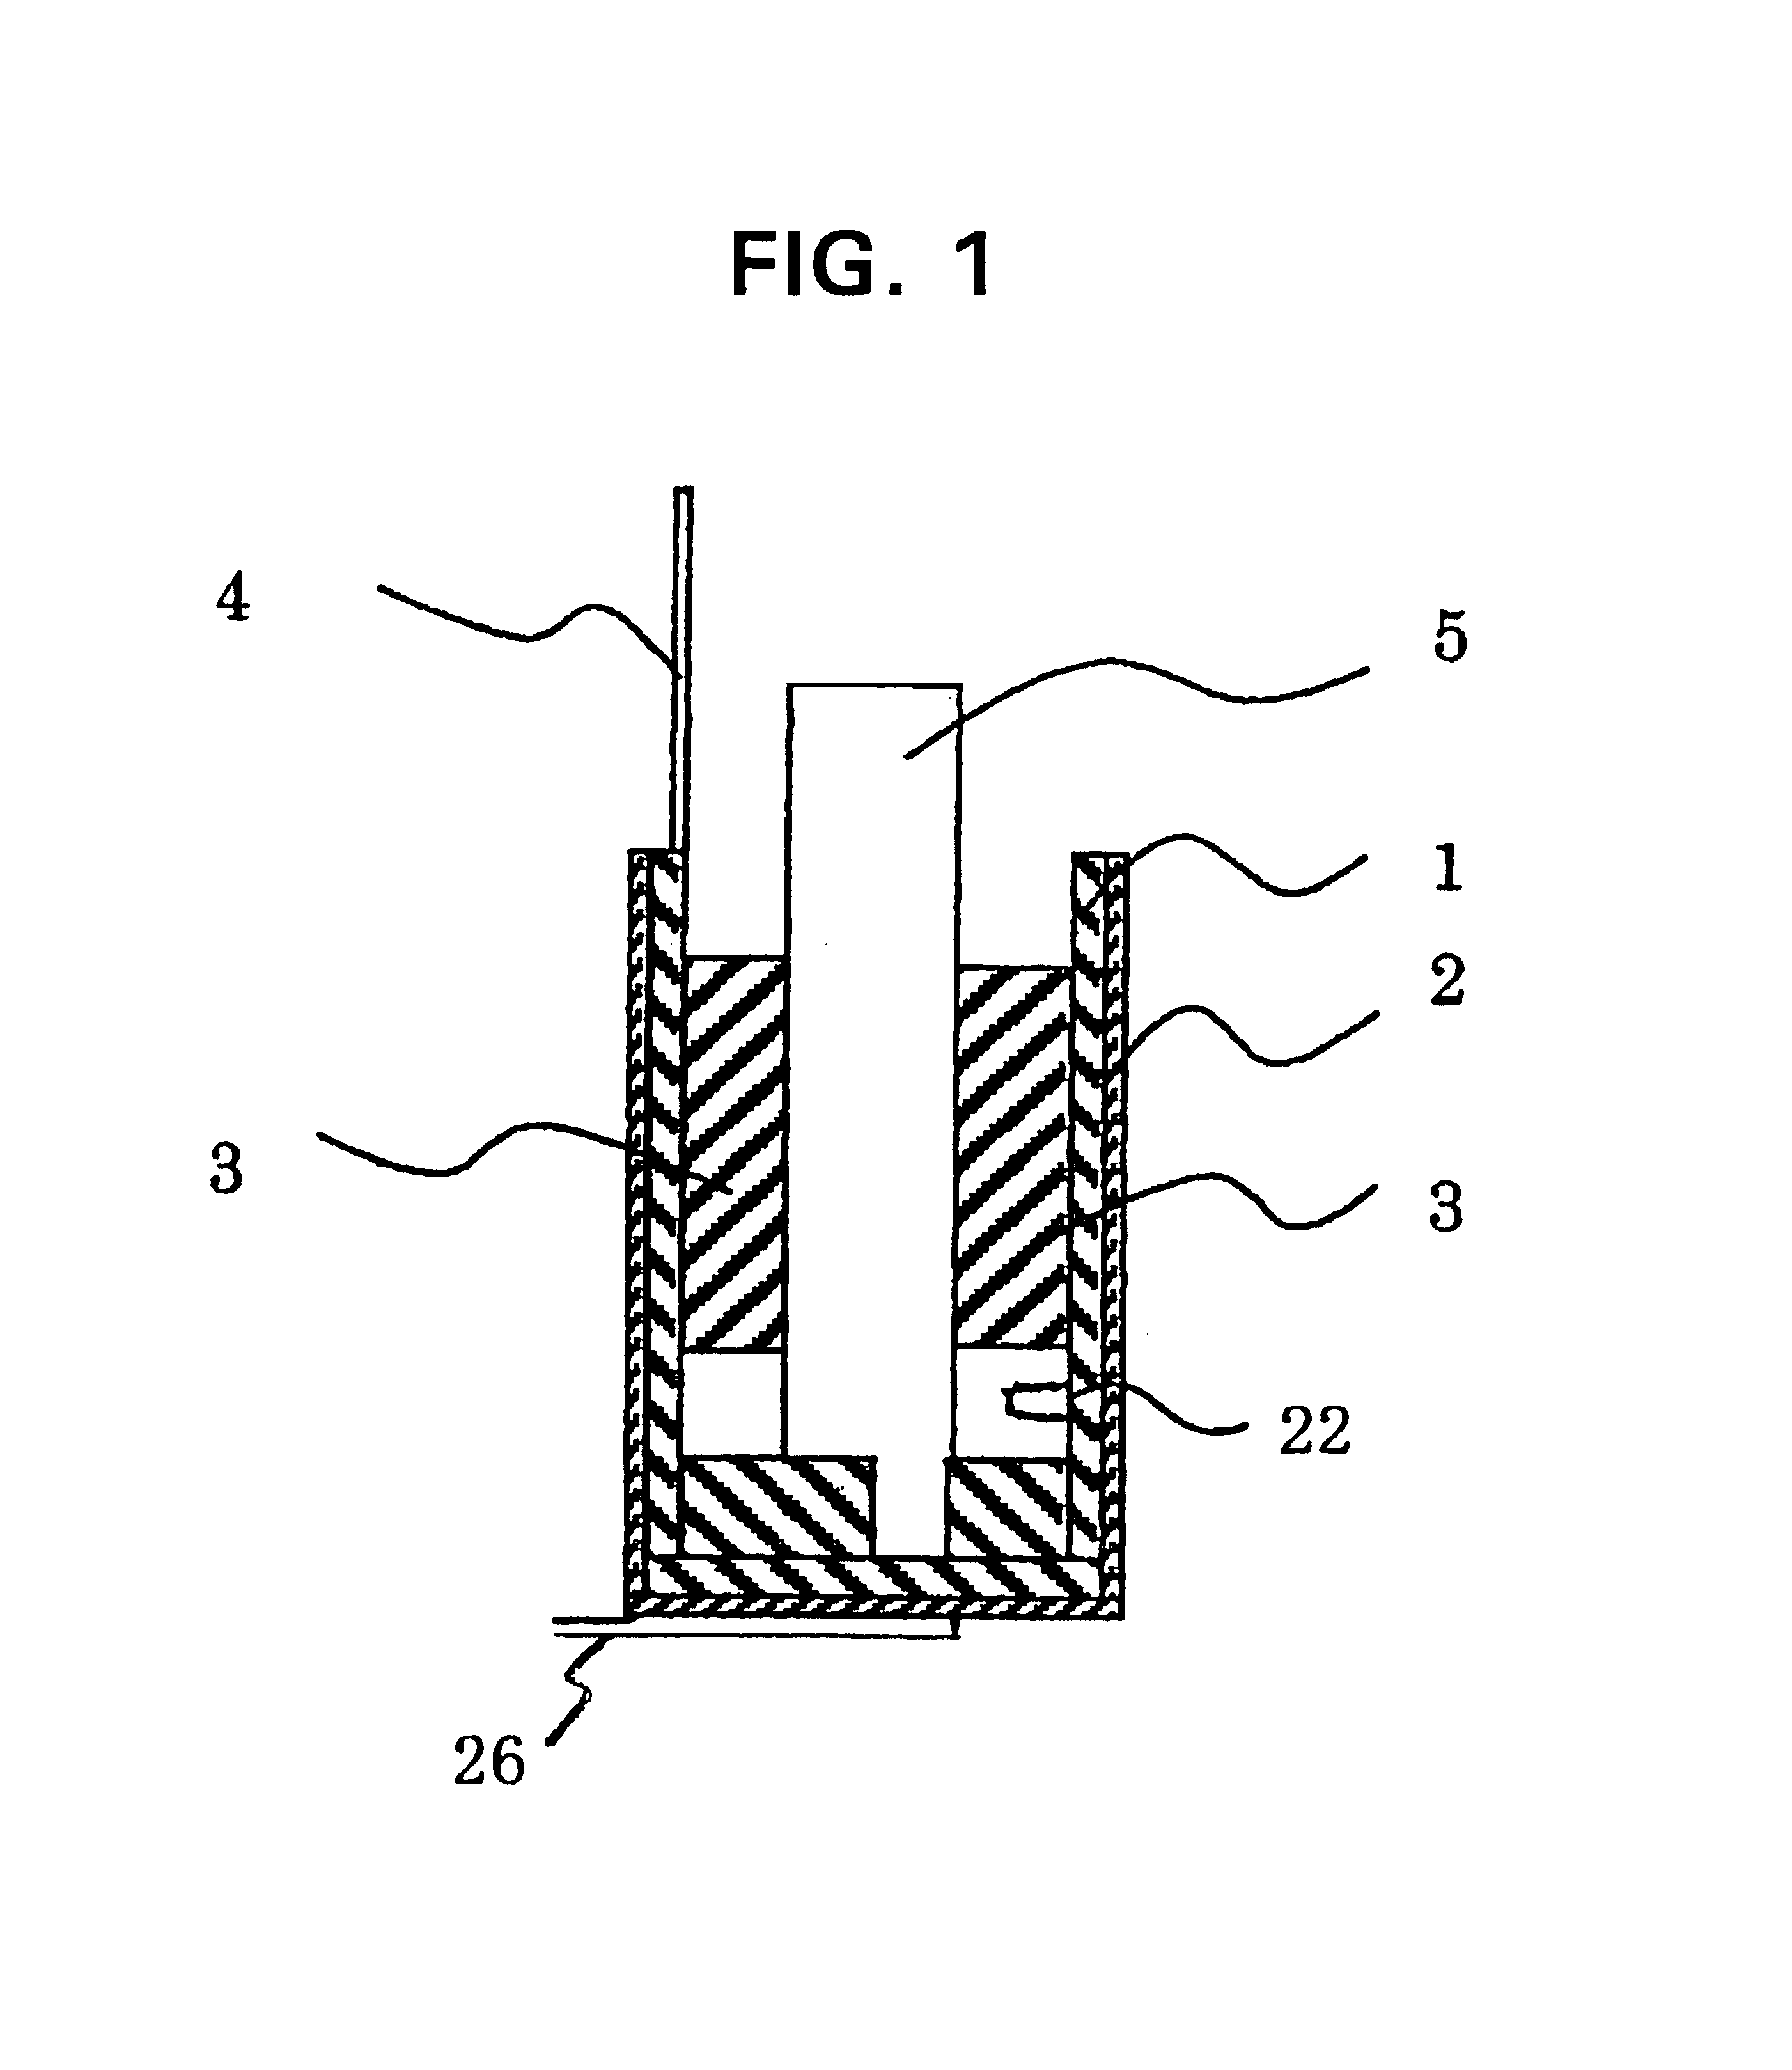 Method of mounting magnetic disk device, cabinet for magnetic disk device, and magnetic disk device